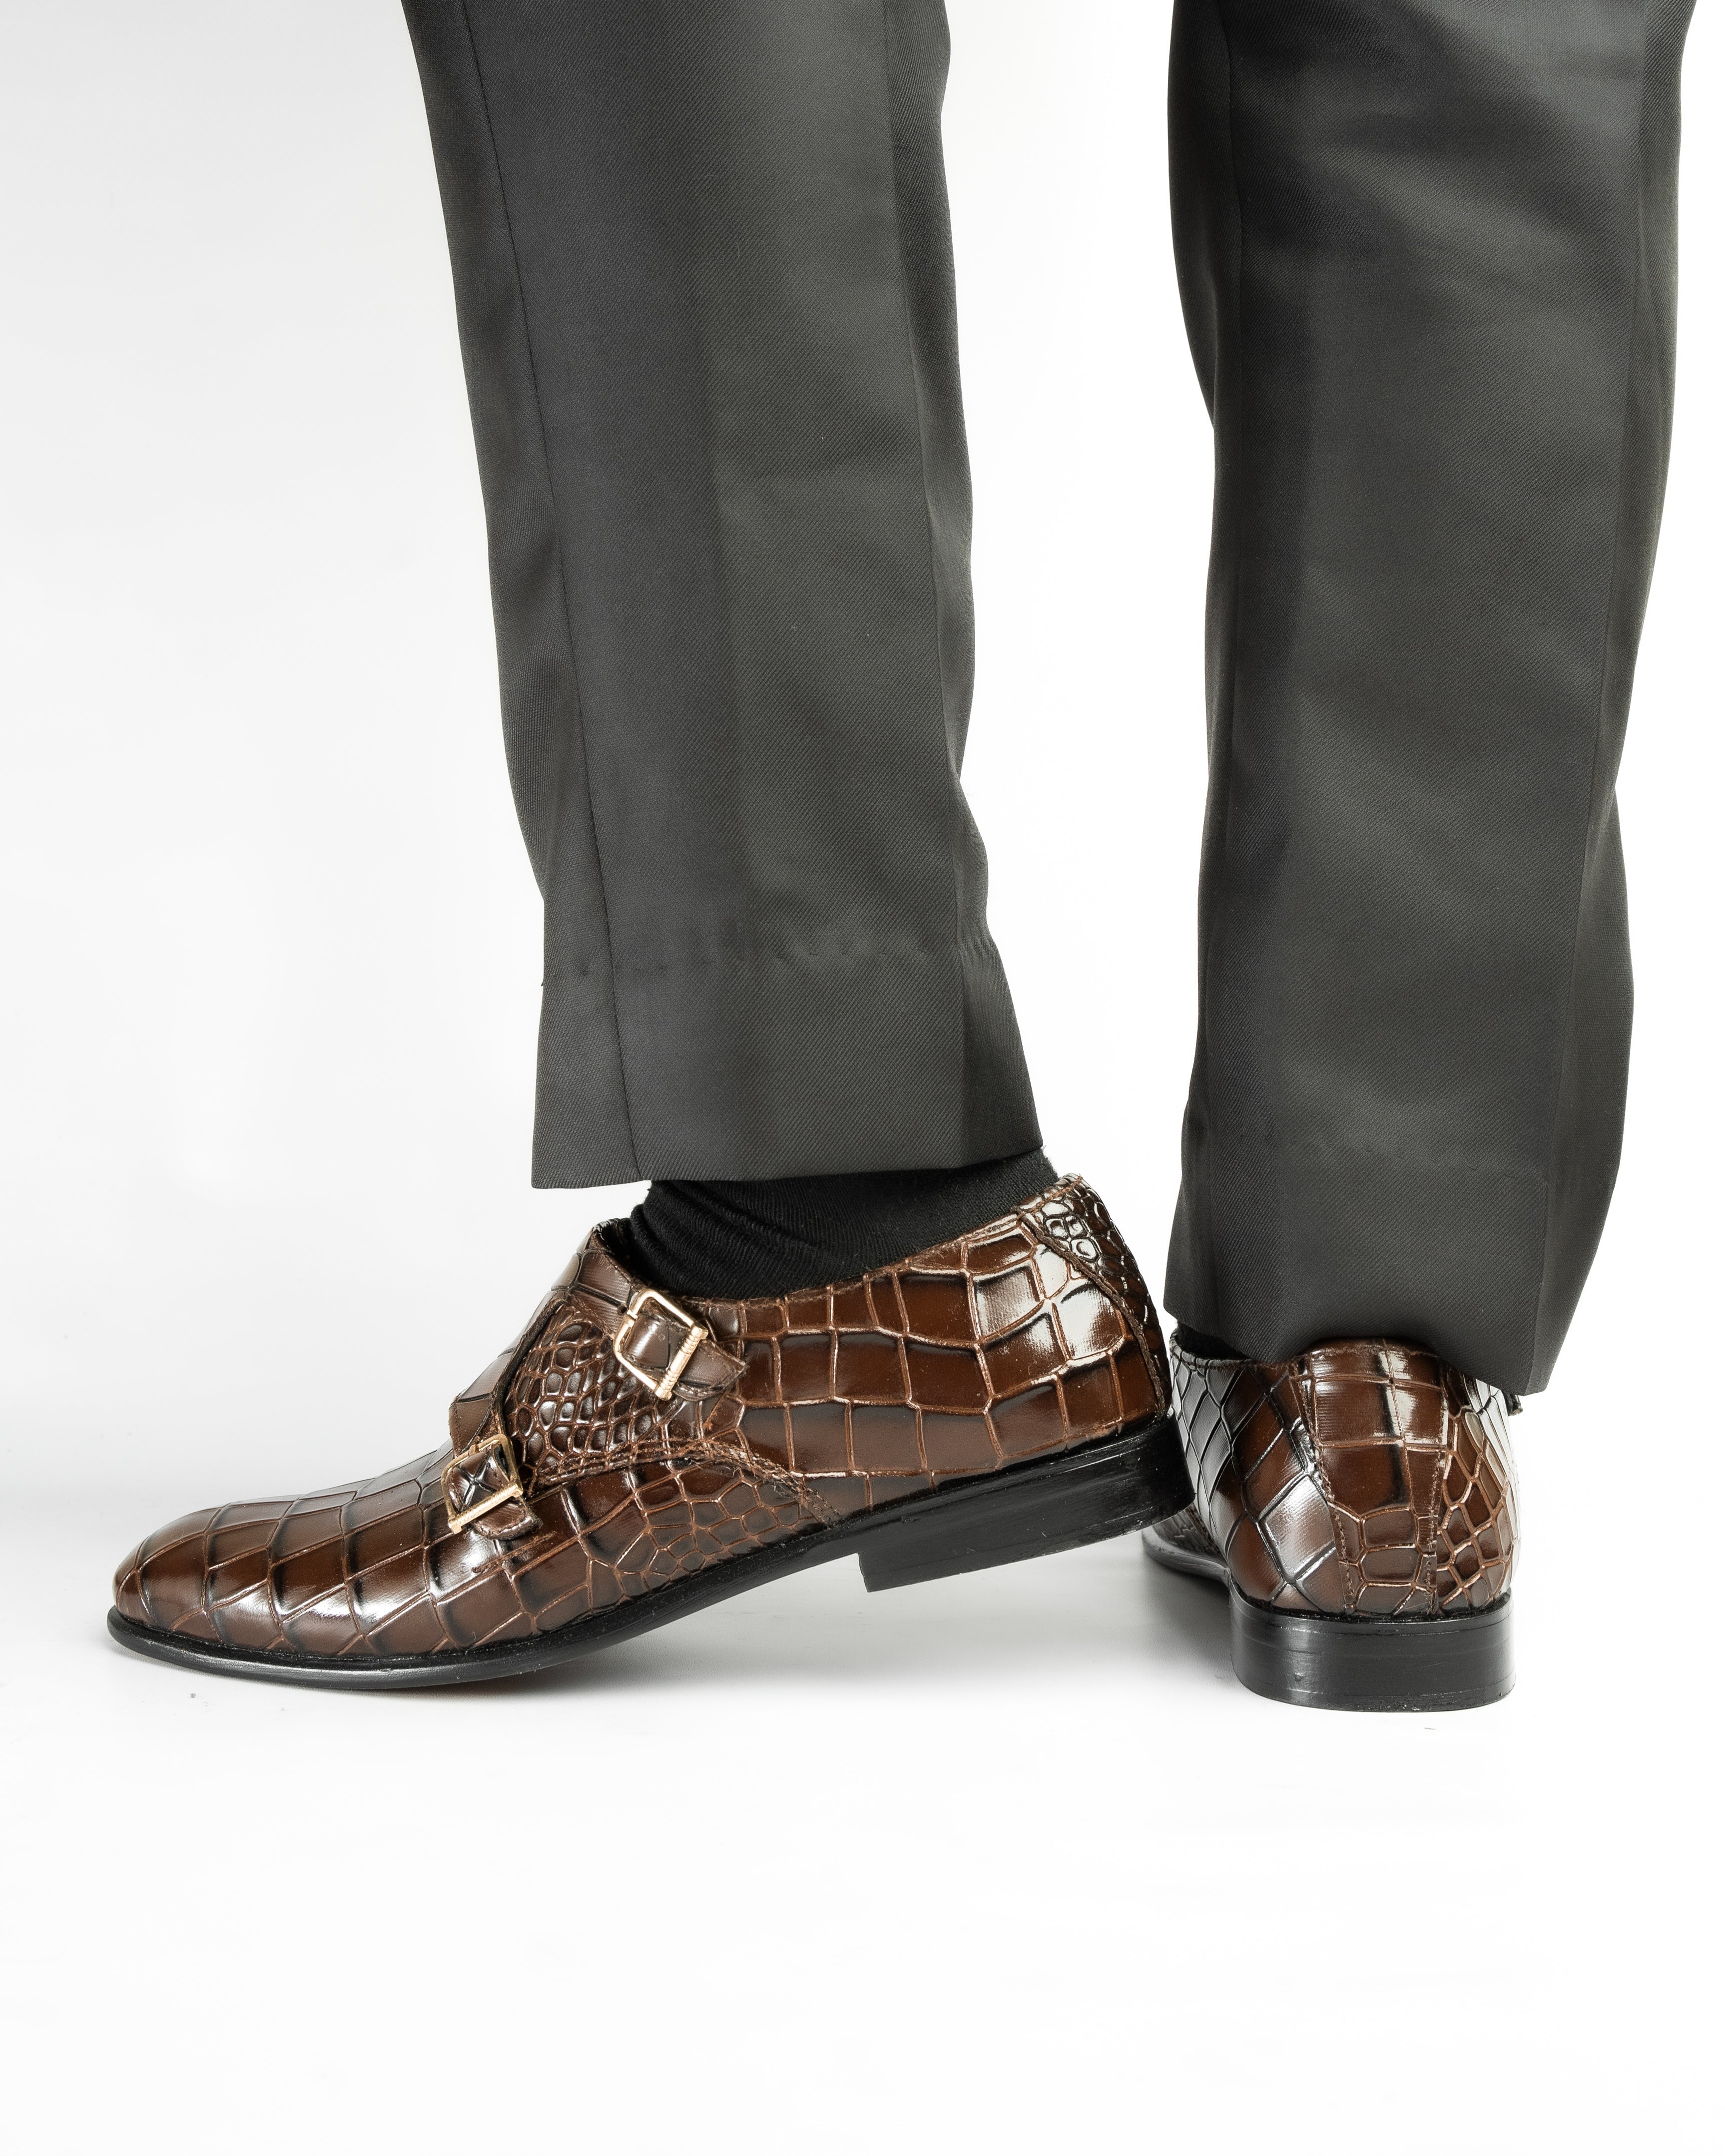 SNS3 Formal shoes in BROWN for men Shop n Save Pakistan